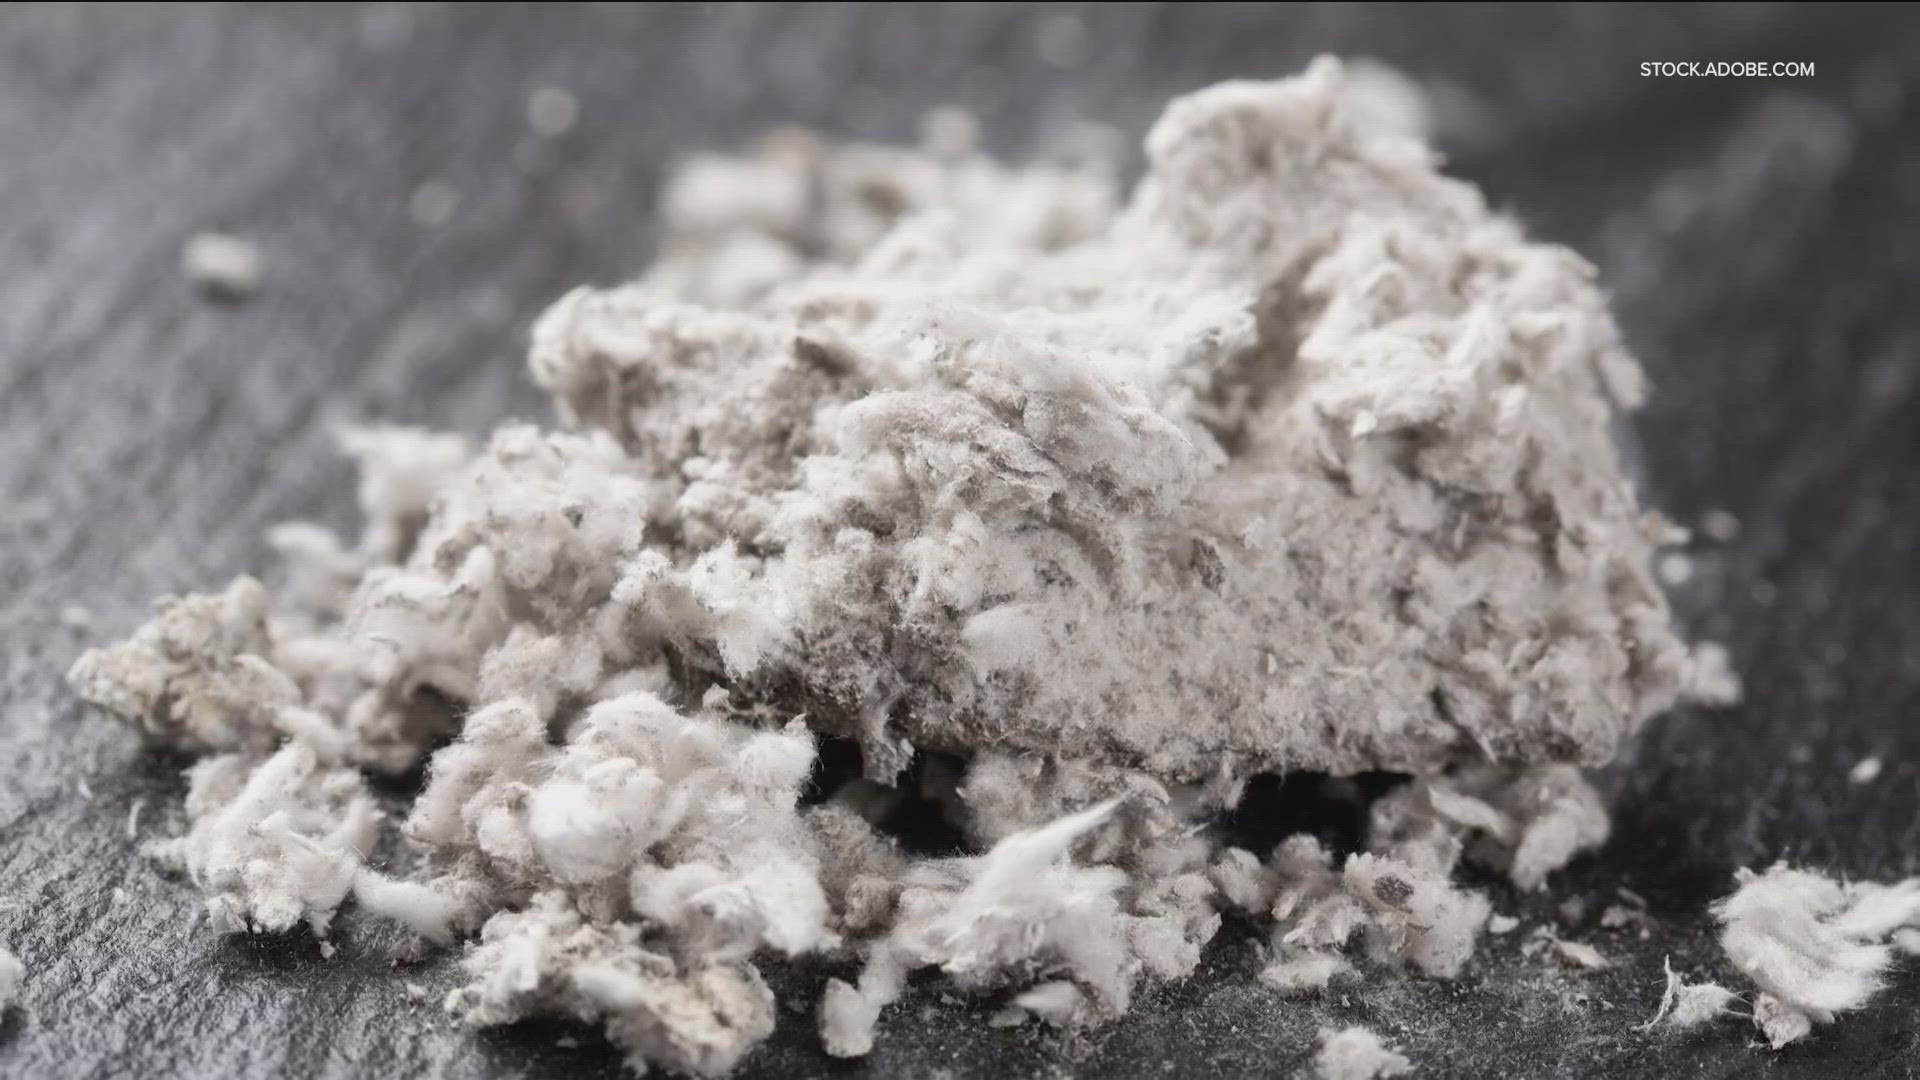 Exposure to asbestos is known to cause lung cancer, mesothelioma and other cancers, and it is linked to more than 40,000 deaths in the U.S. each year.